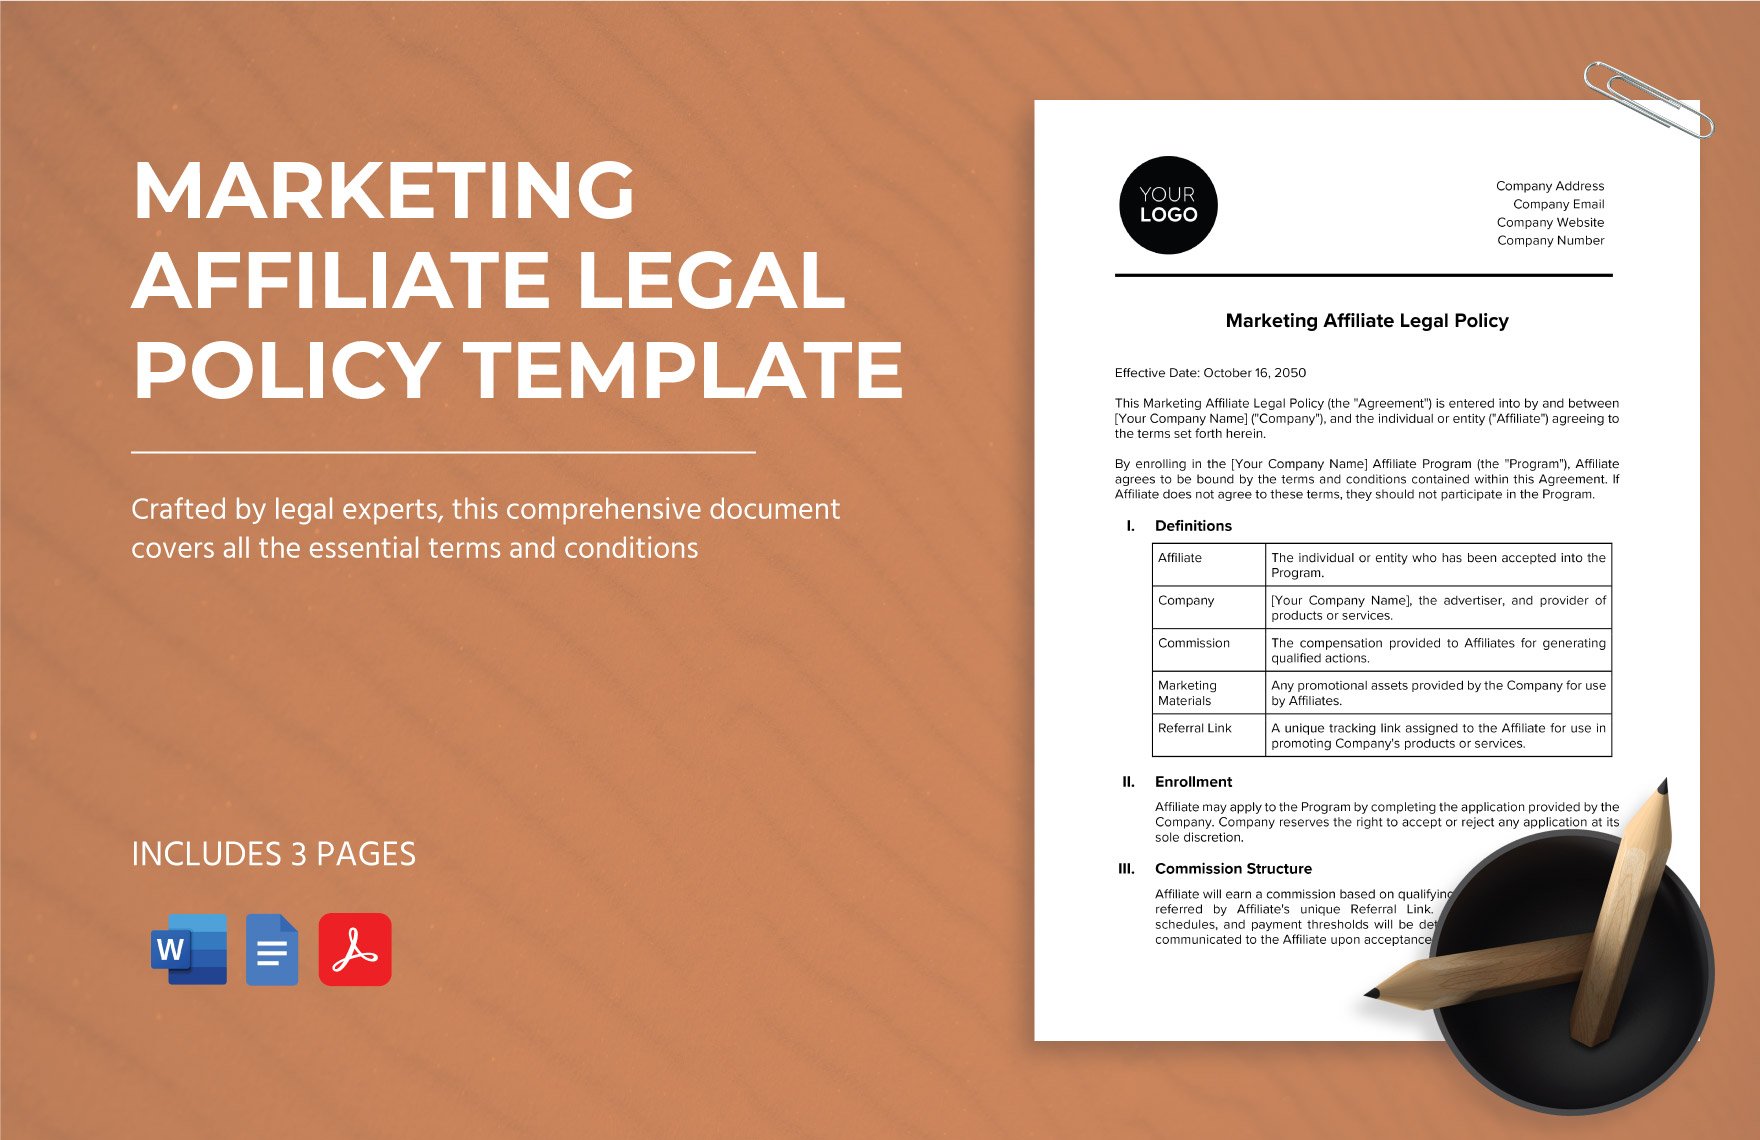 Marketing Affiliate Legal Policy Template in Word, Google Docs, PDF